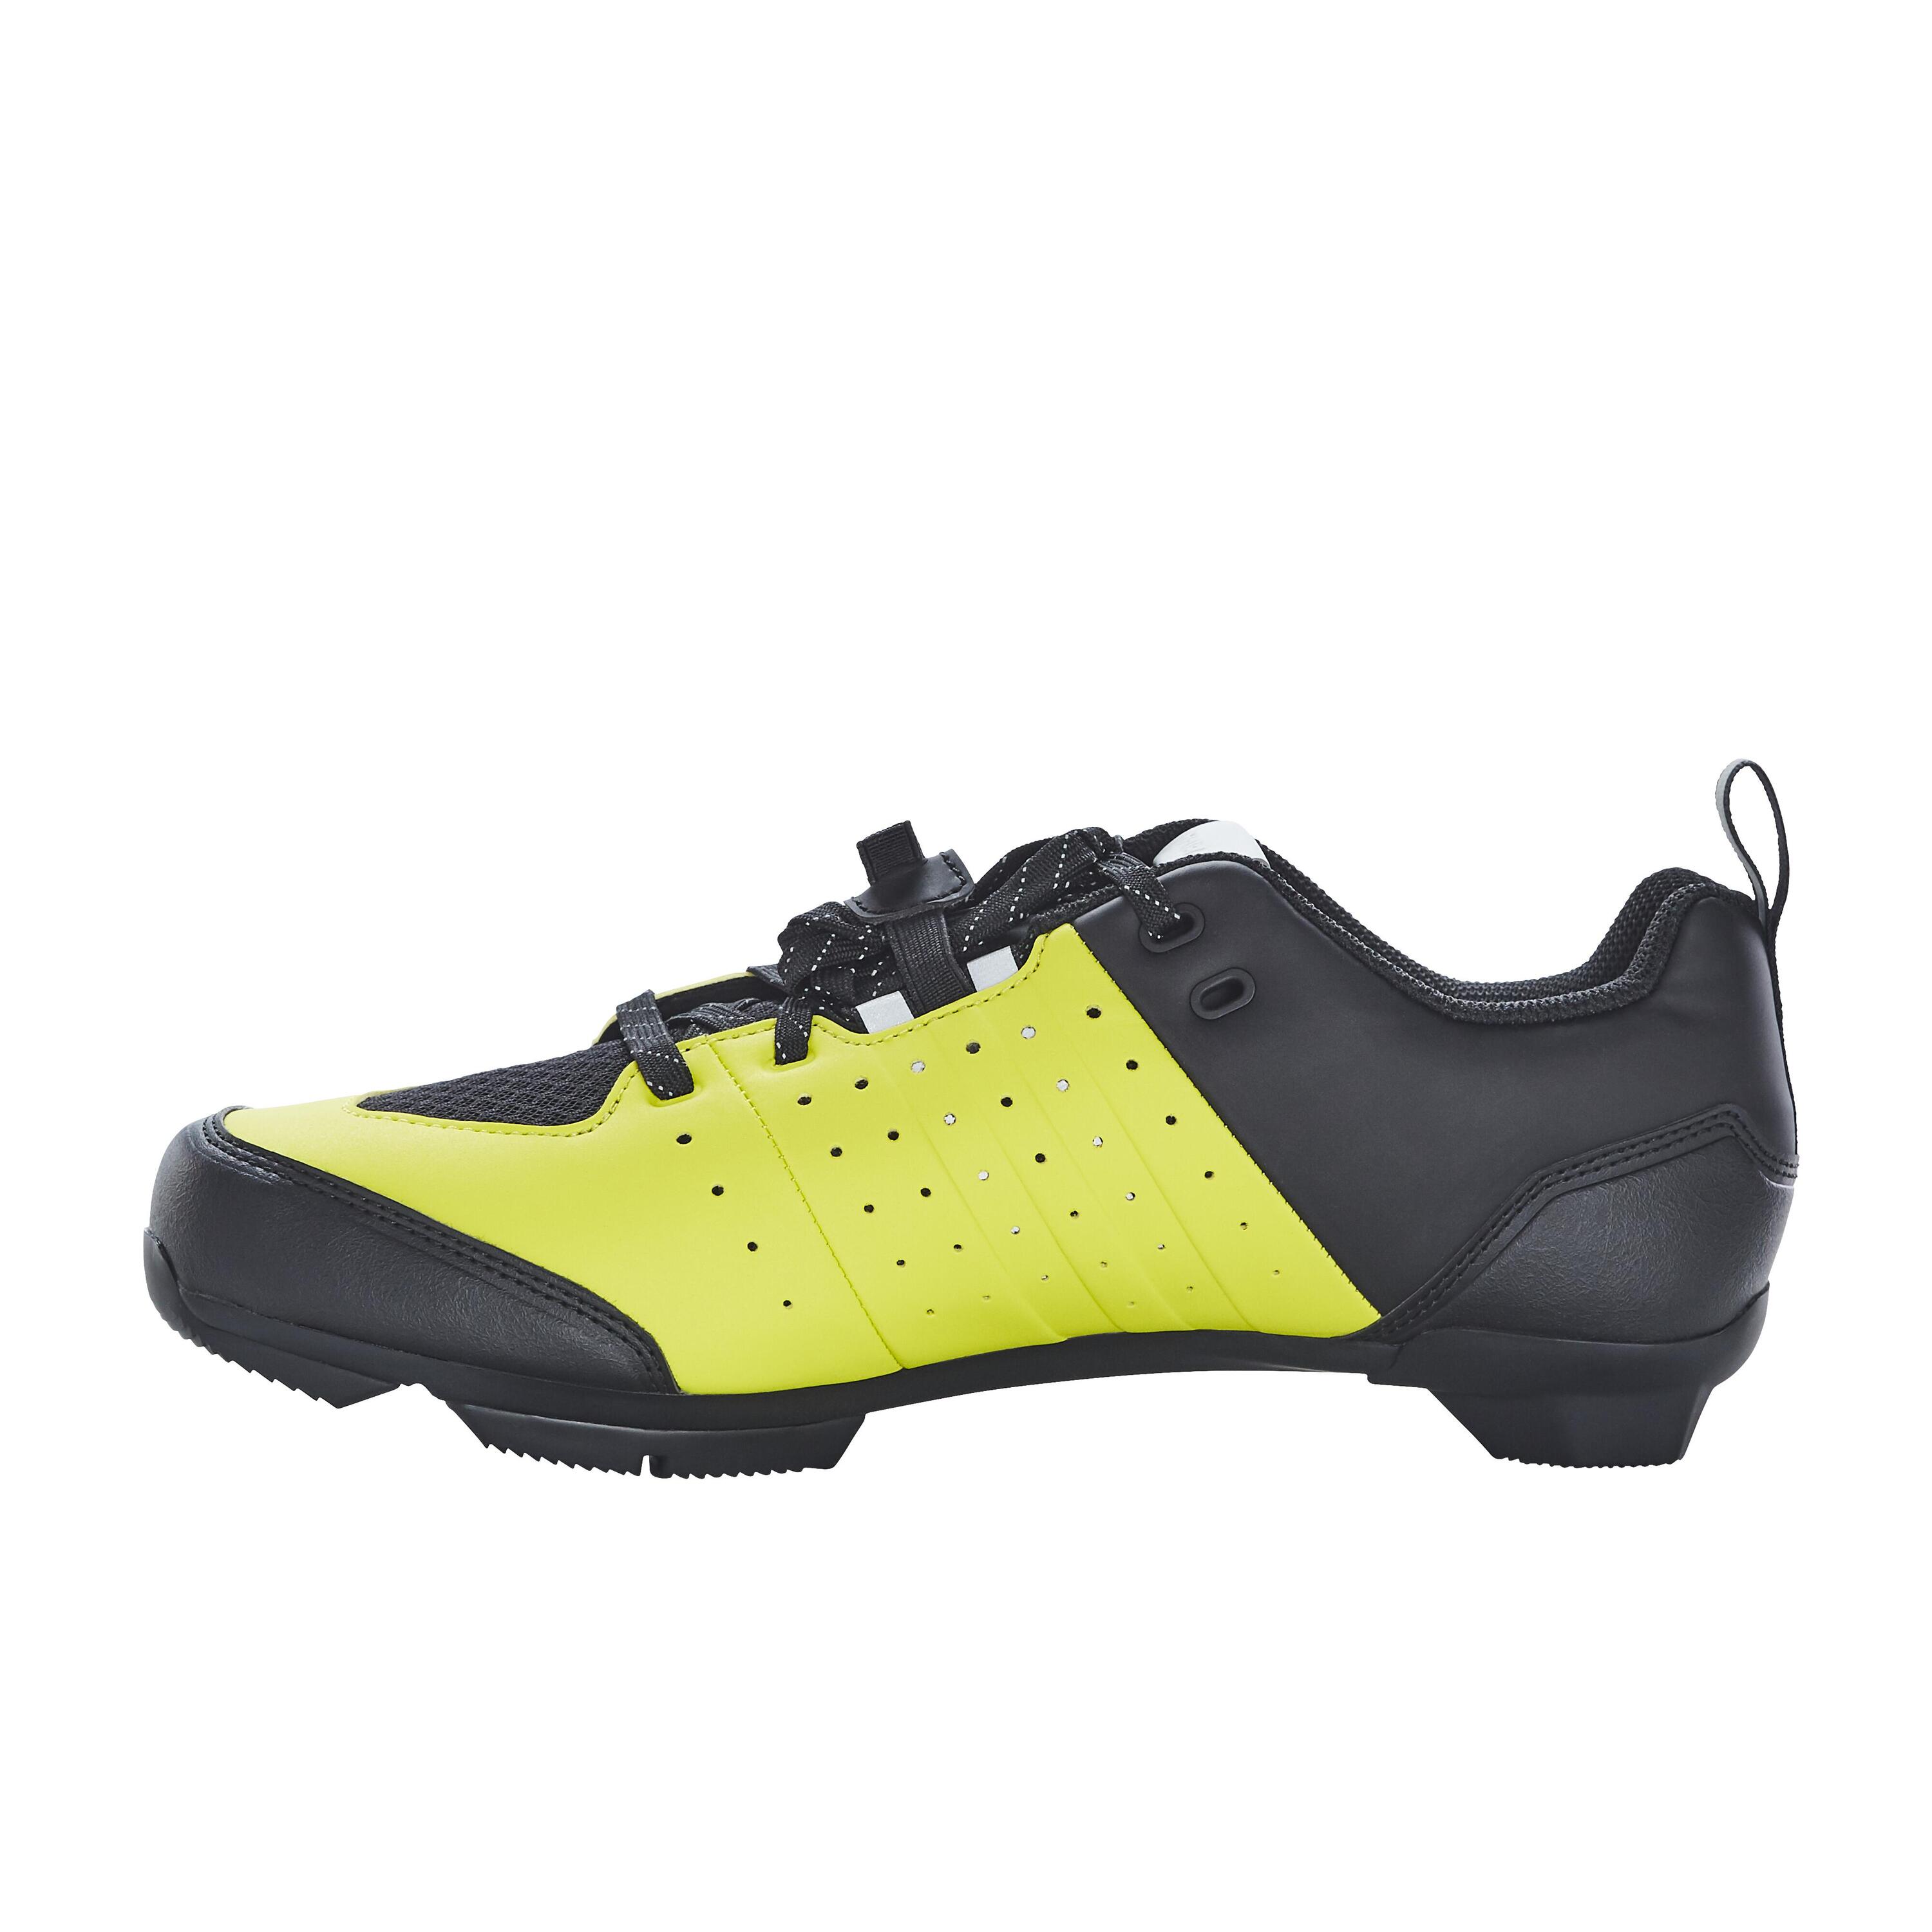 Road and Gravel Cycling Lace-Up SPD Shoes GRVL 500 - Yellow 5/5